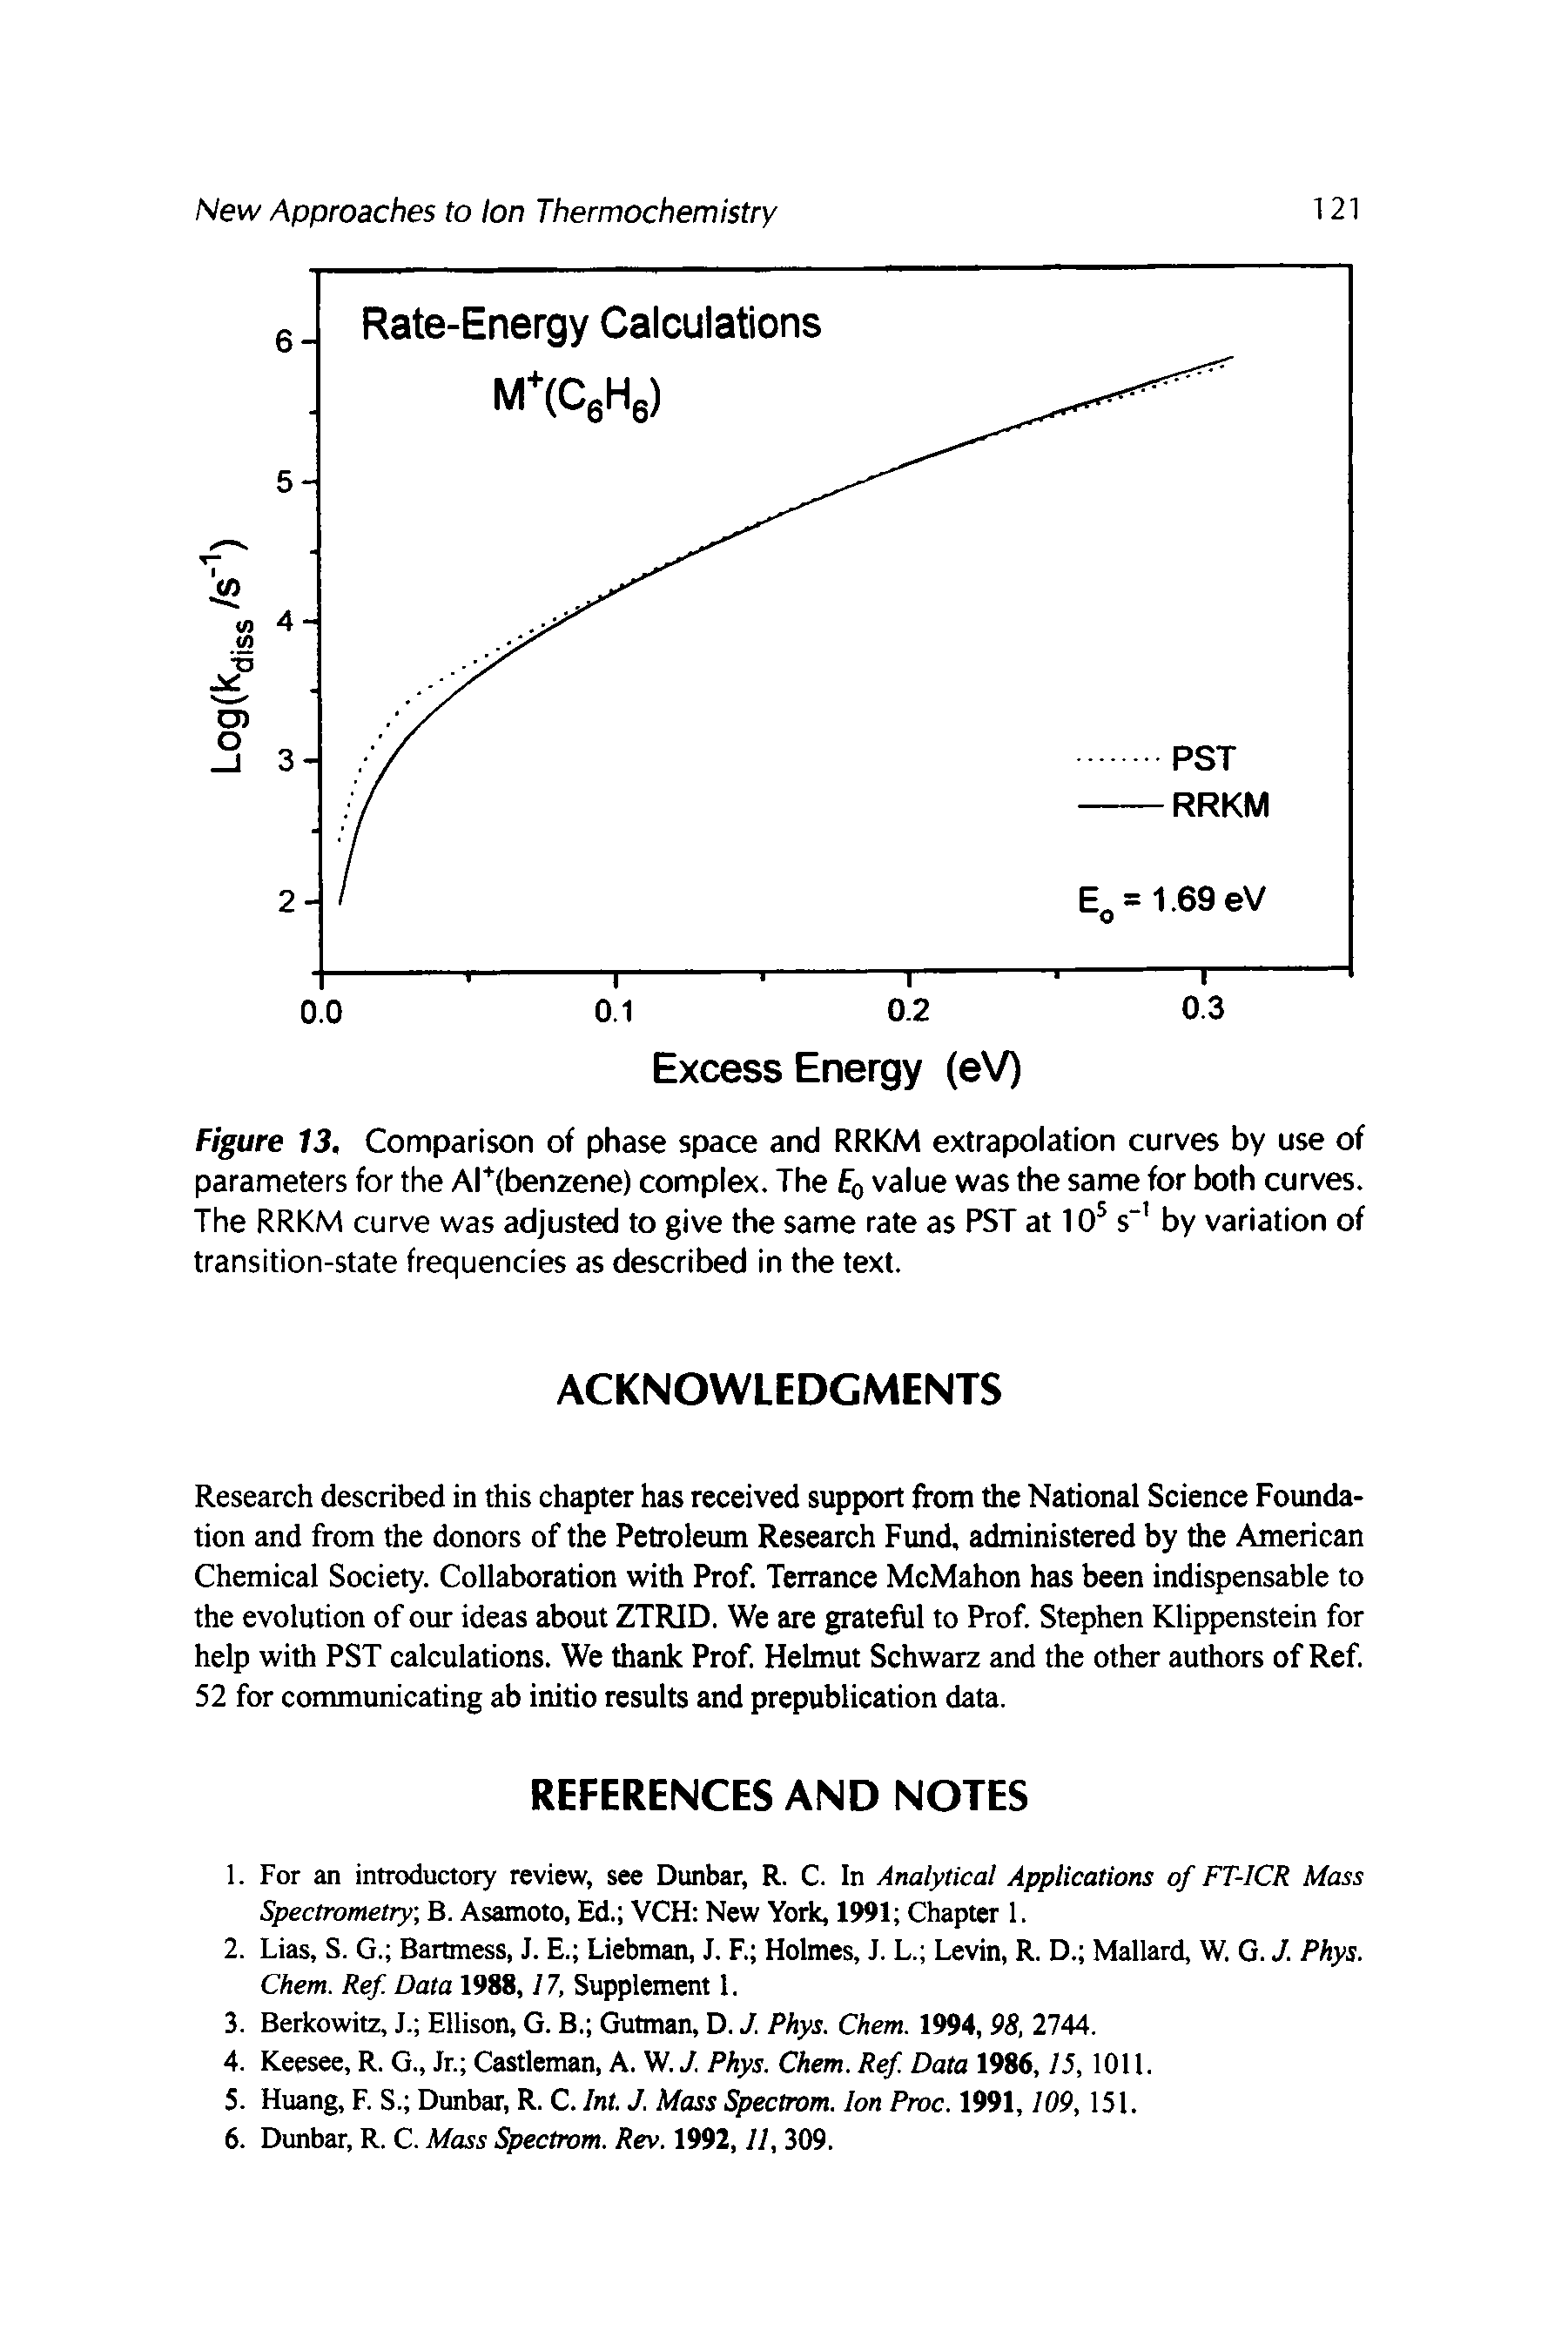 Figure 13, Comparison of phase space and RRKM extrapolation curves by use of parameters for the Ar(benzene) complex. The Eq value was the same for both curves. The RRKM curve was adjusted to give the same rate as PST at 10 s" by variation of transition-state frequencies as described in the text.